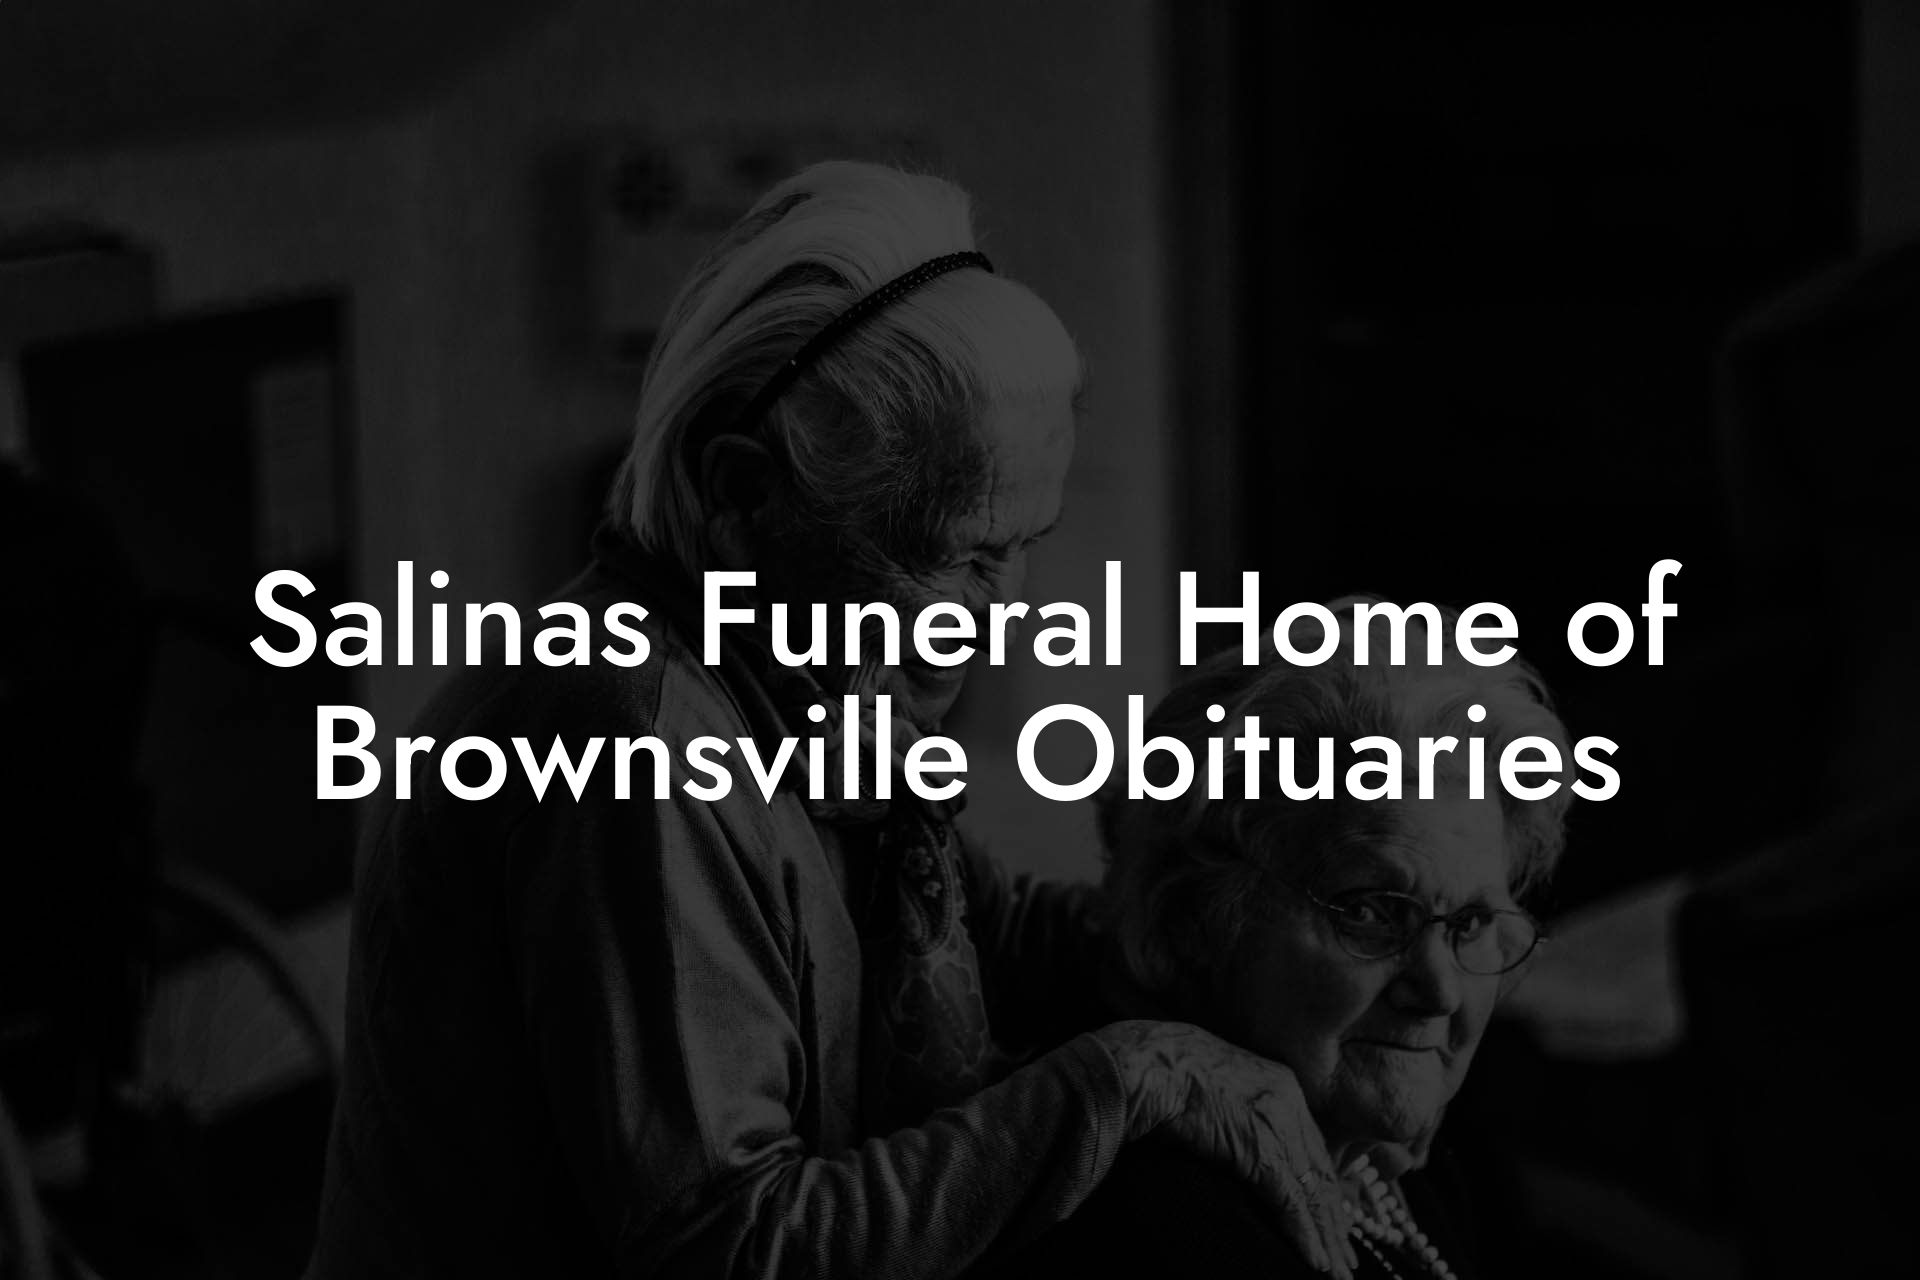 Salinas Funeral Home of Brownsville Obituaries